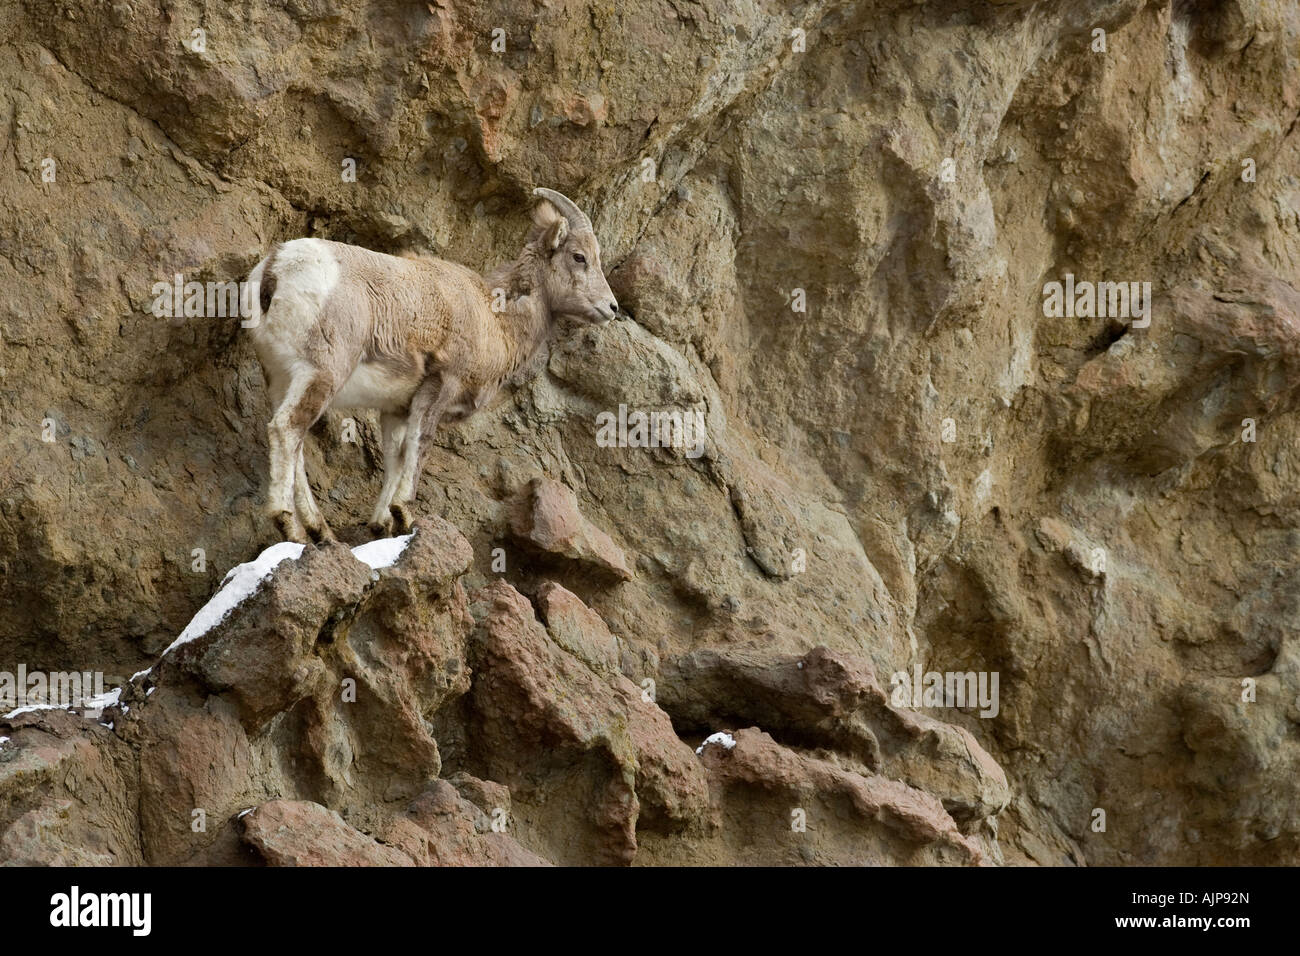 Bighorn sheep on cliff Stock Photo